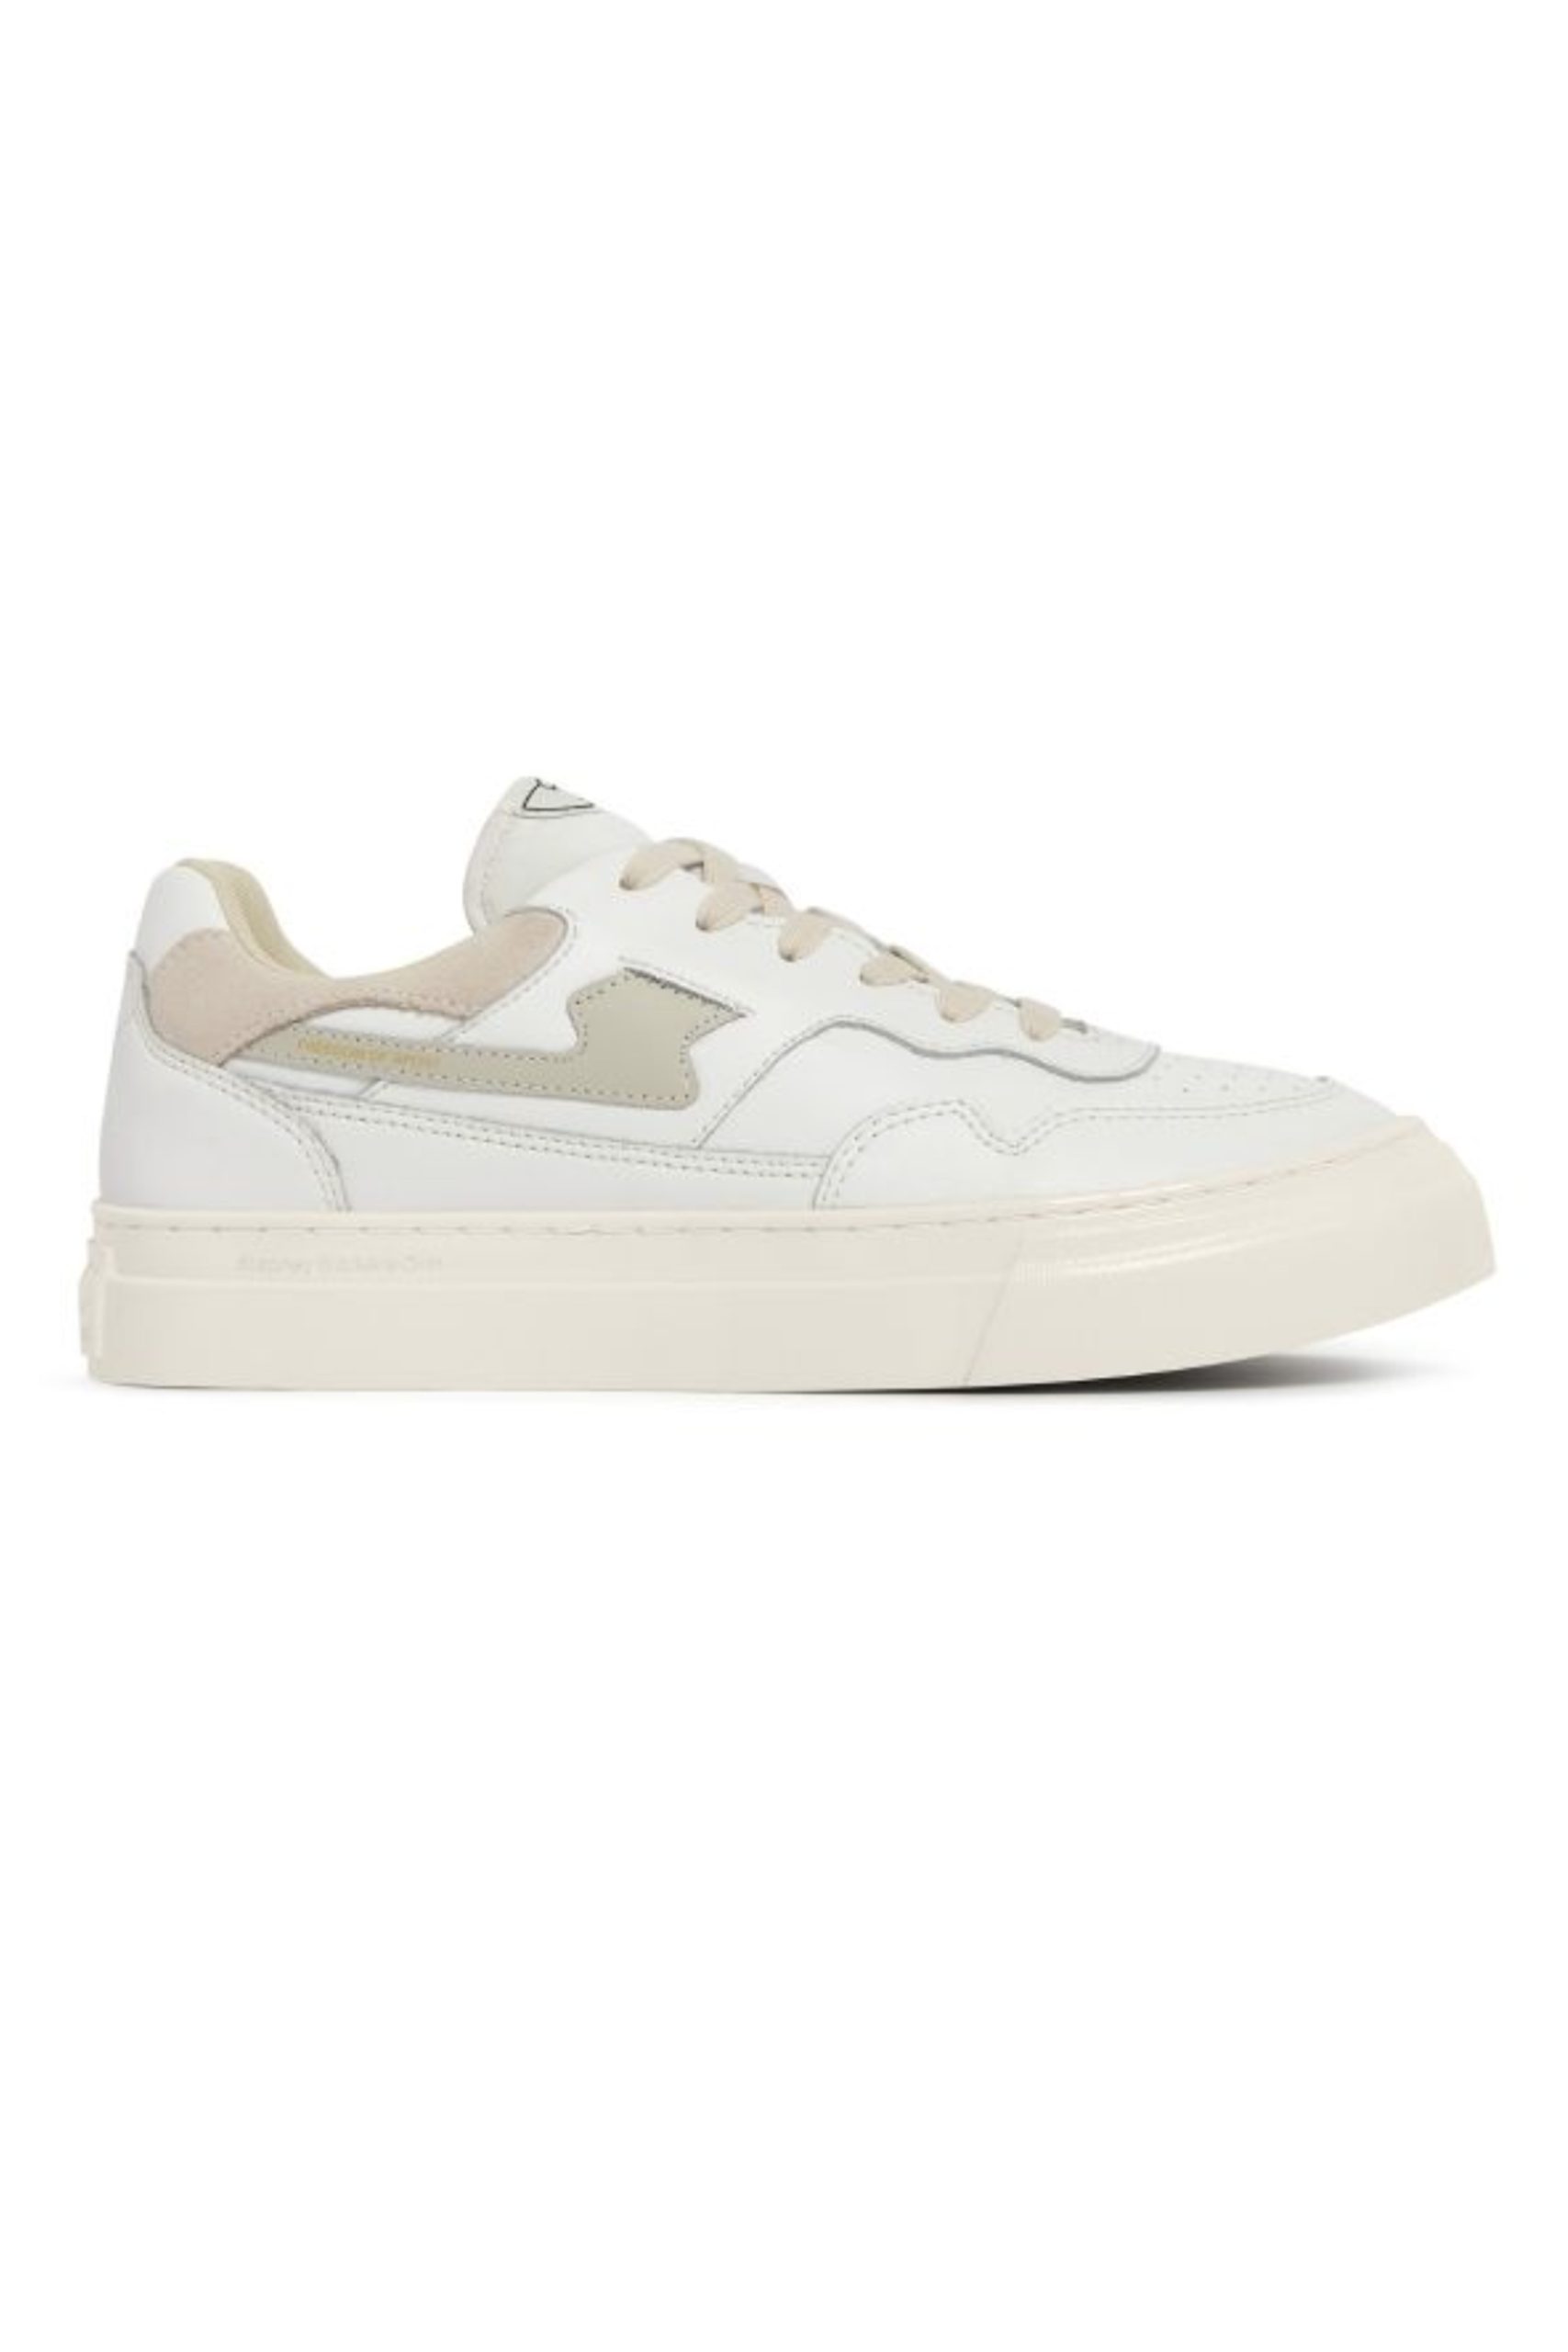 SWC Sneakers PEARL S-STRIKE Leather white Putty